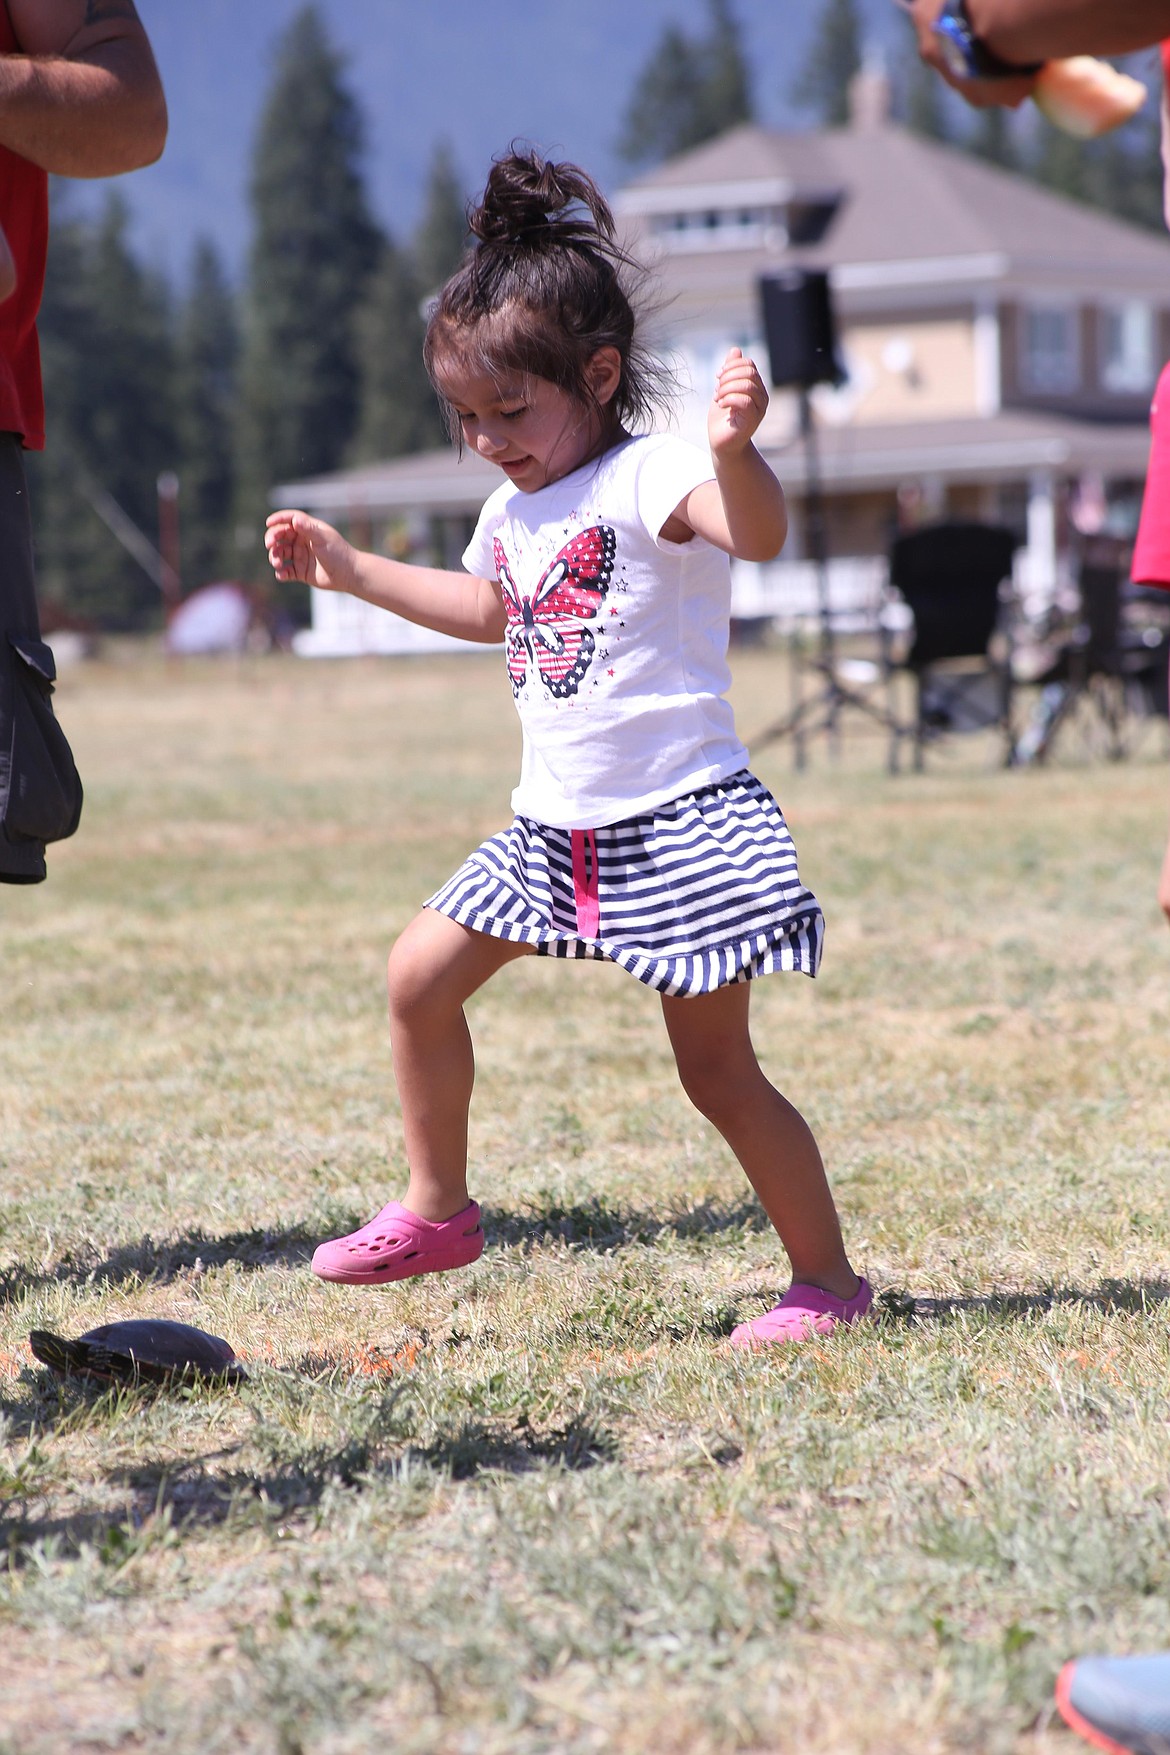 Kids aged two to 10 participated in the turtle racing event of the Old Fashioned Fourth of July celebration sponsored by the Rod and Gun Club. 
The turtles got "too hot" after the 10 year old age group.